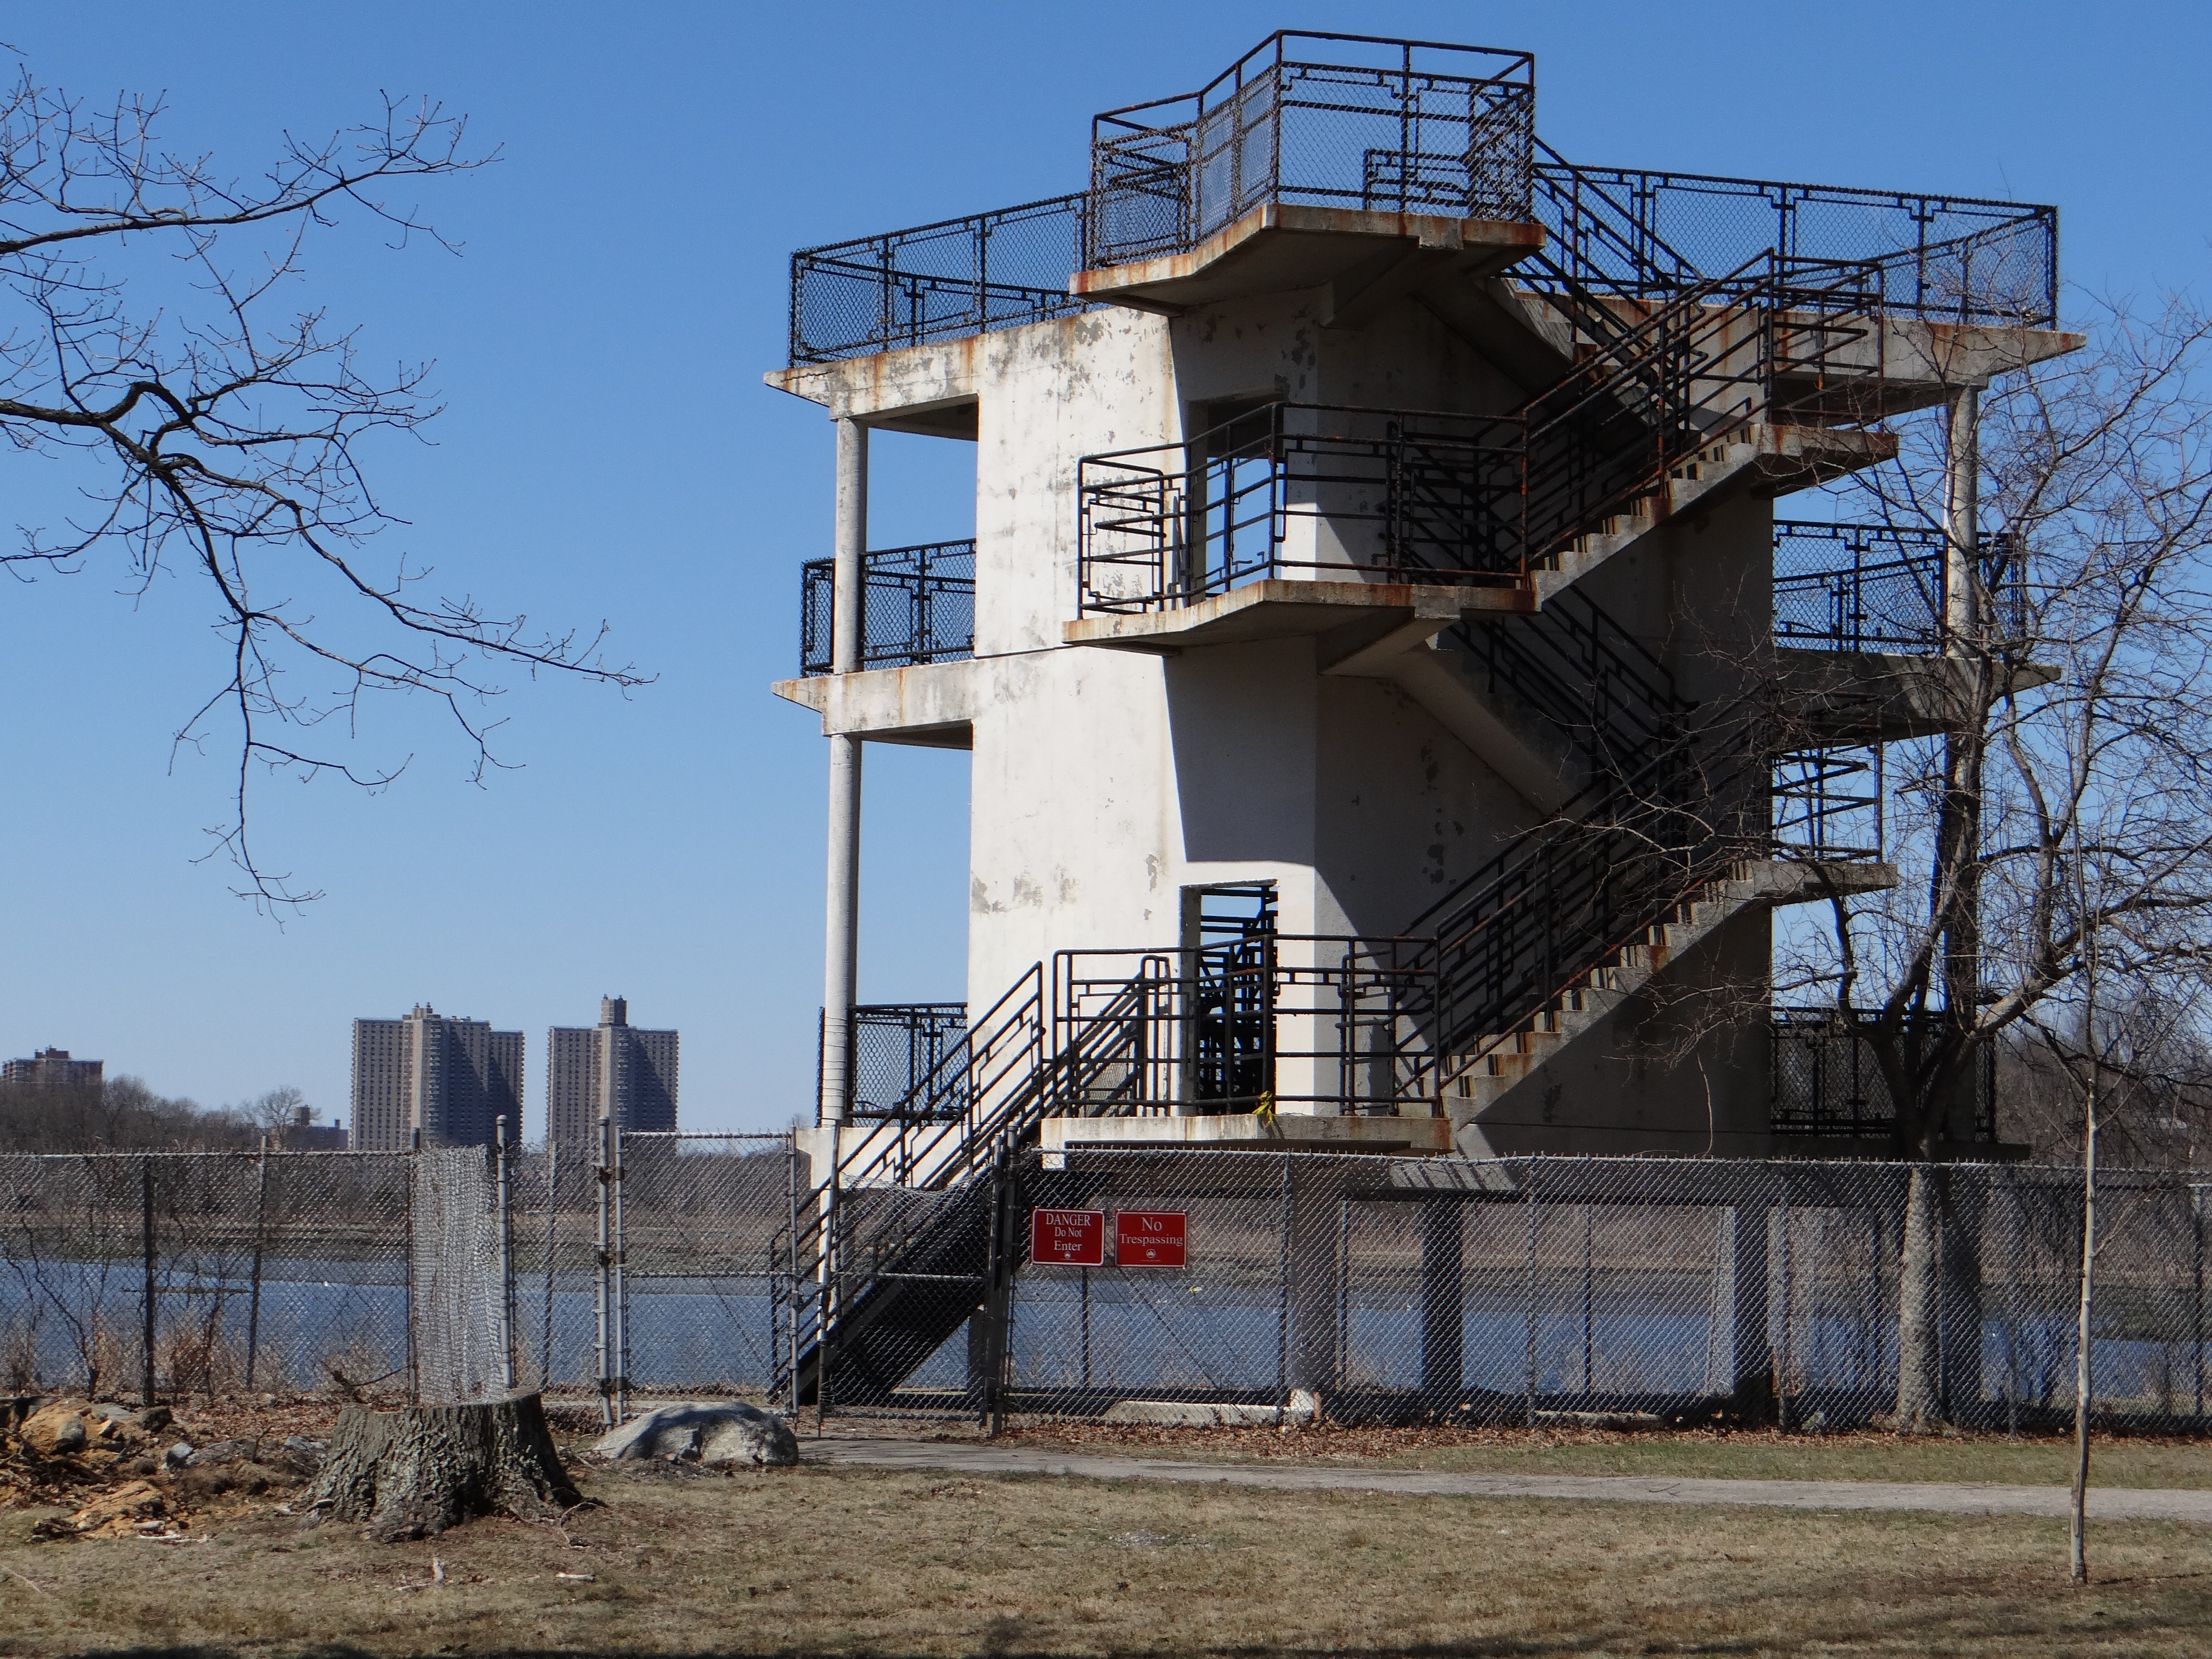 observation tower near Orchard Beach parking lot